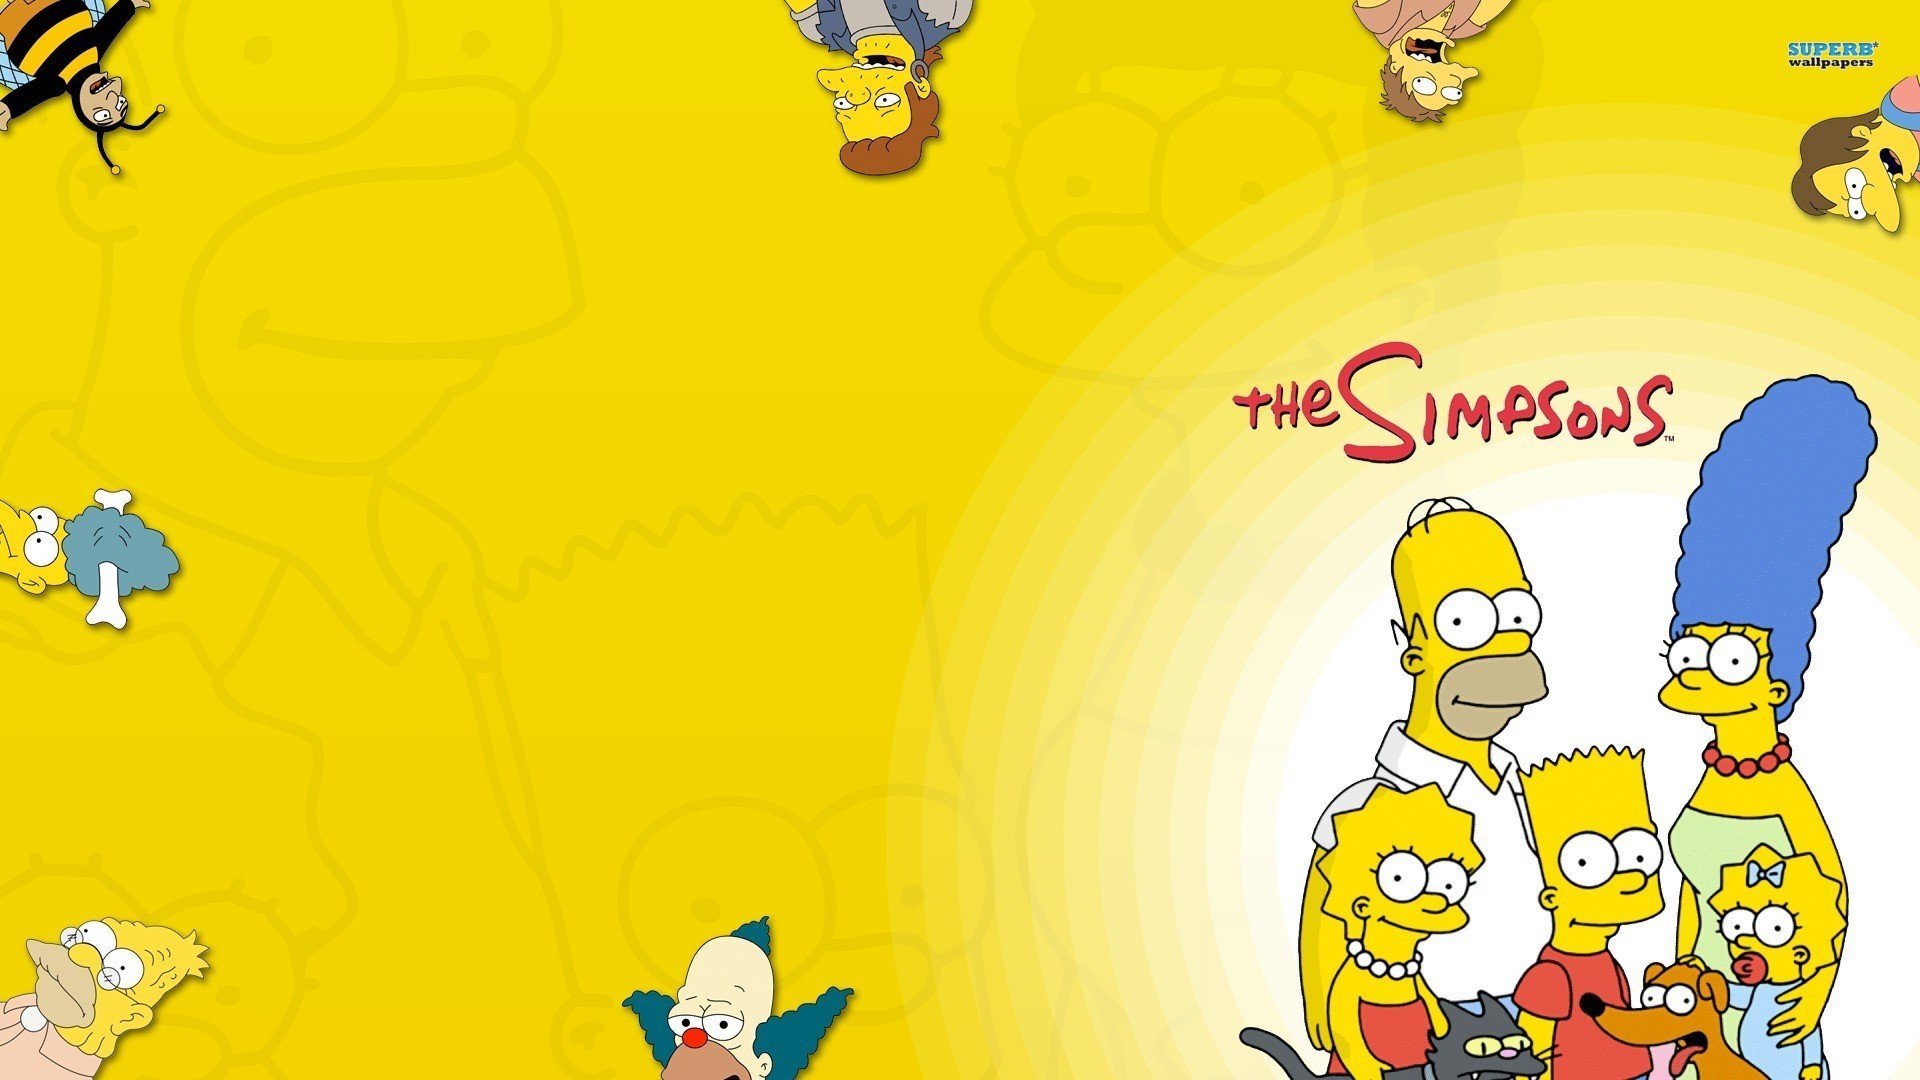 The Simpsons, Homer Simpson, Marge Simpson, Bart Simpson, Lisa Simpson, Maggie Simpson Wallpaper